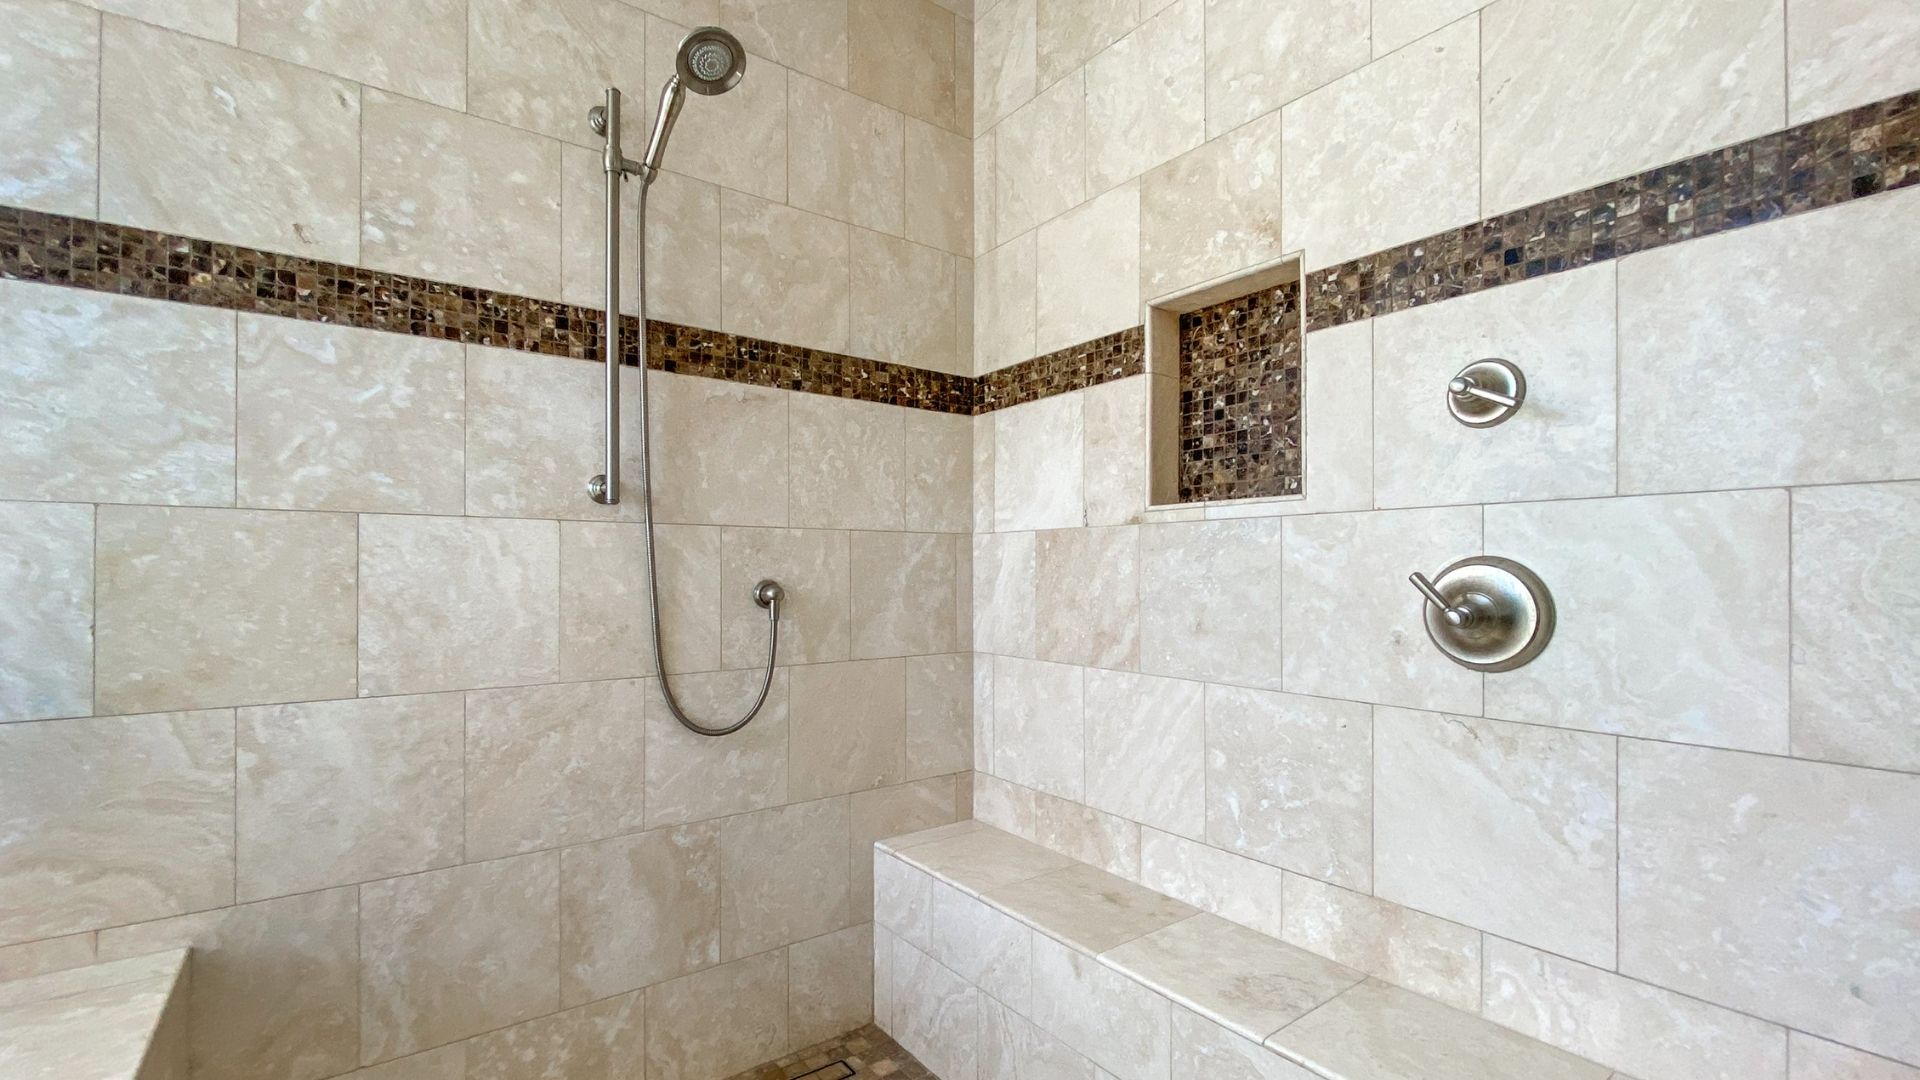 Bathroom tiling with a shower attached to the wall